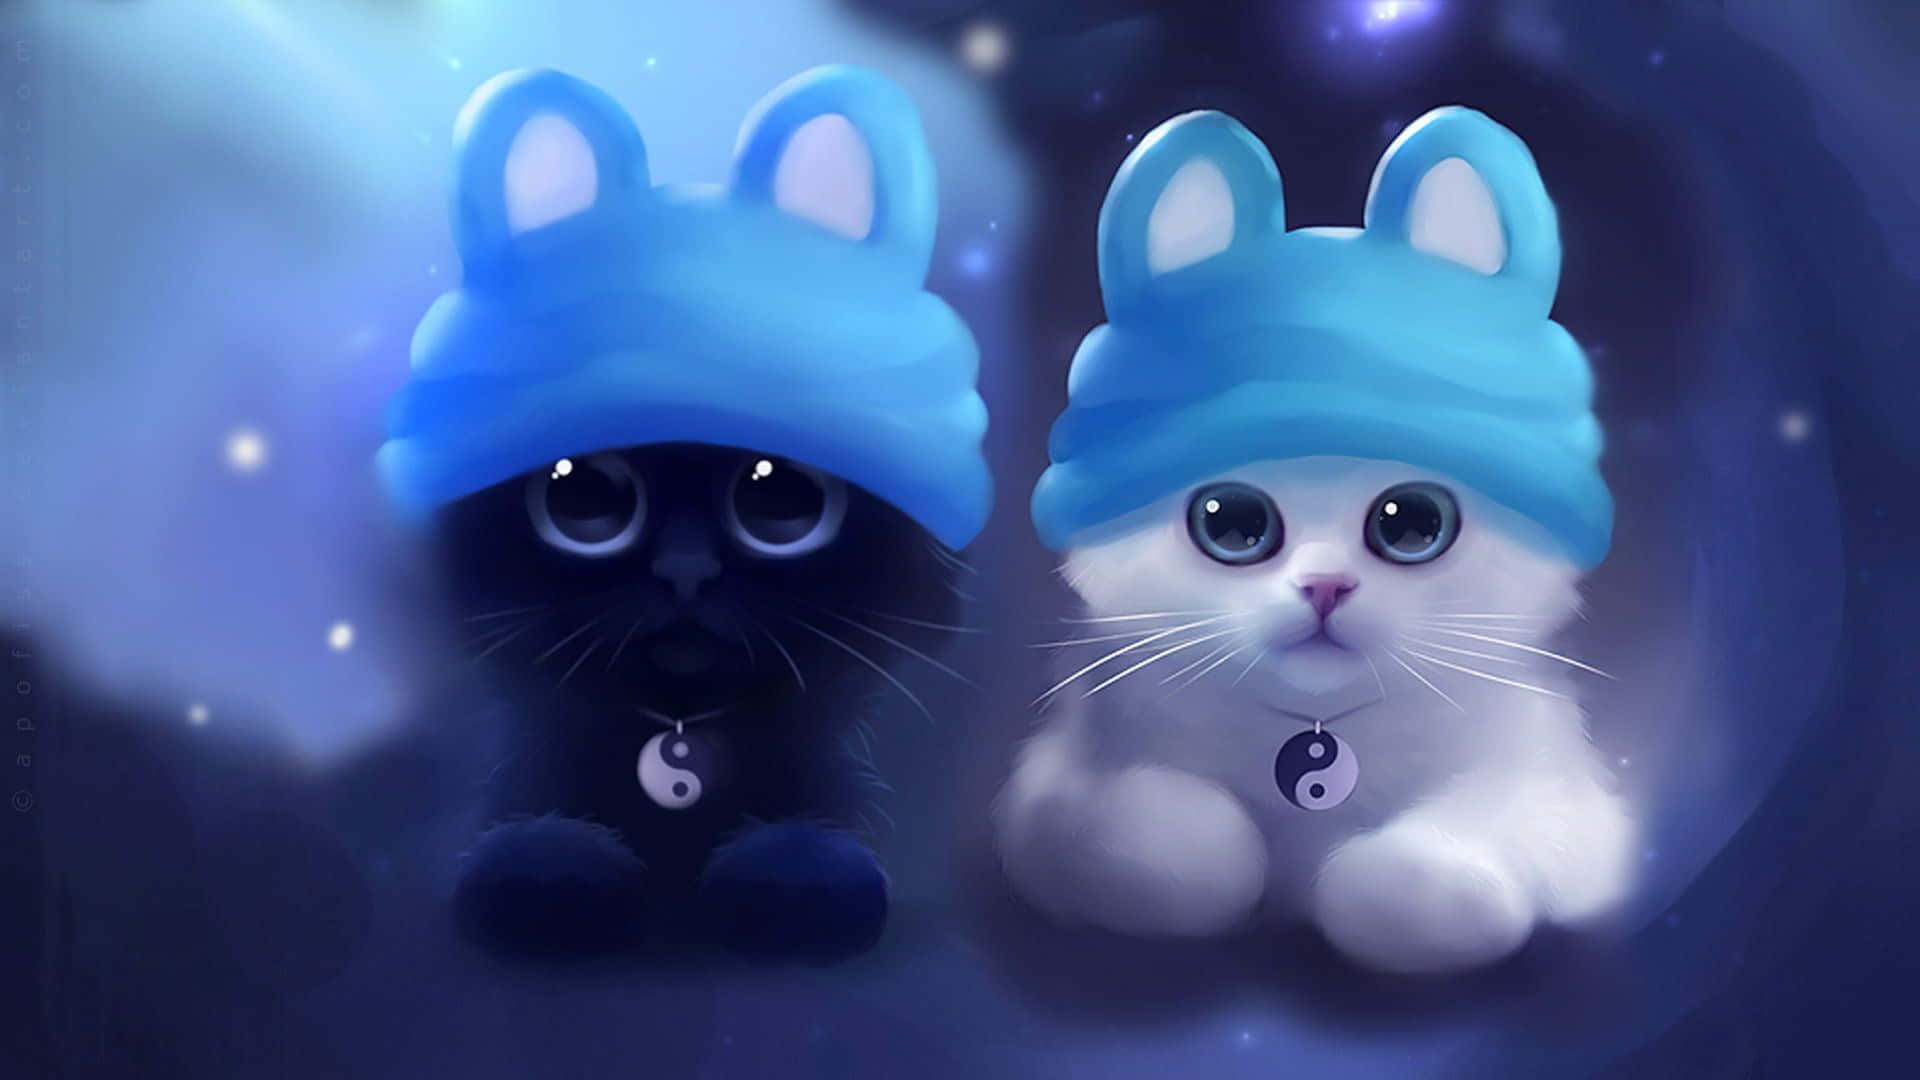 Download Cute Animated Pictures 1920 x 1080 